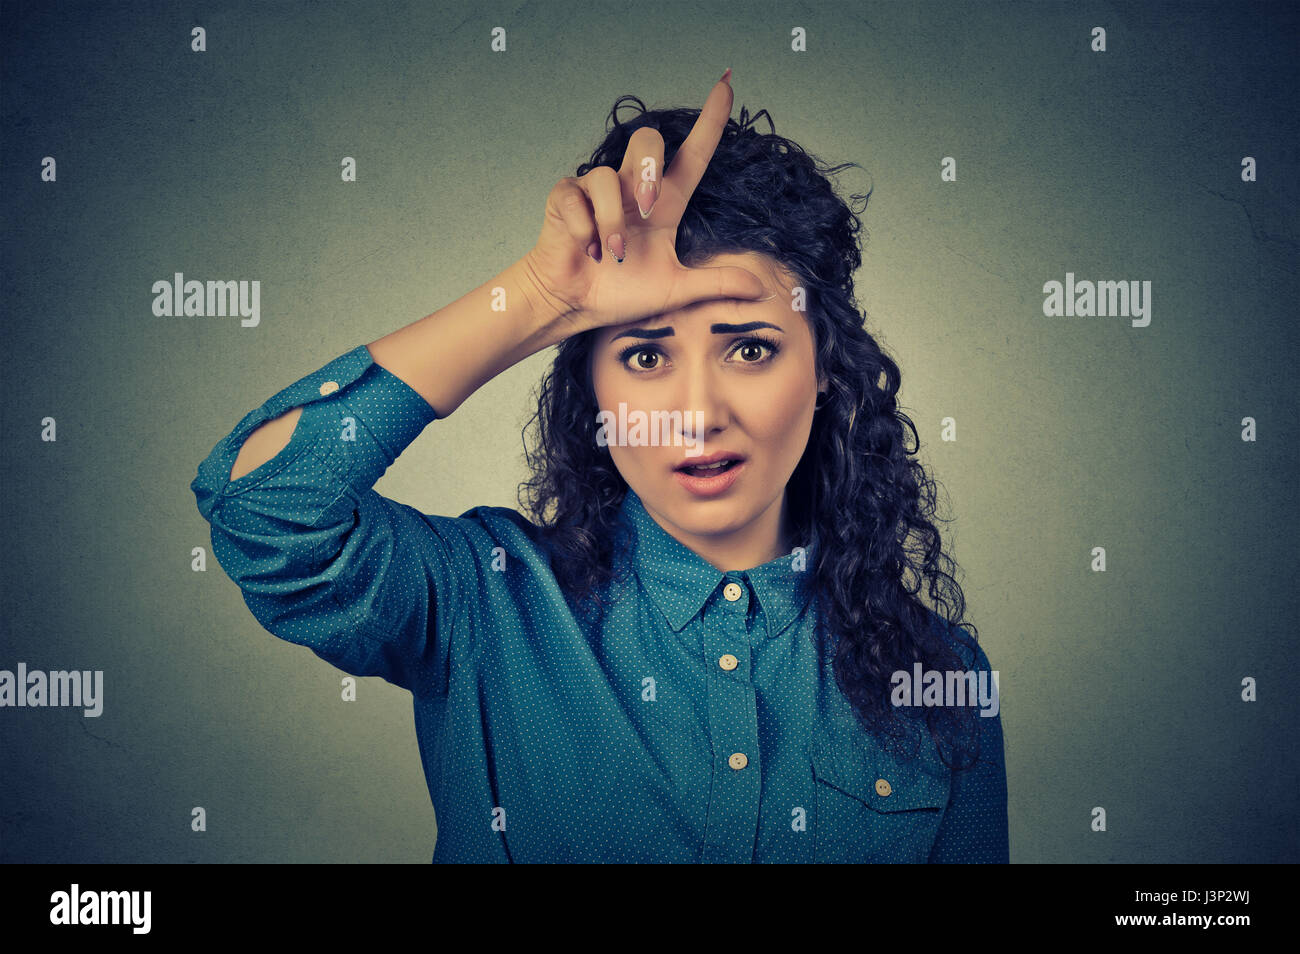 Closeup portrait young unhappy woman giving loser sign on forehead, looking at you, disgust on face isolated on gray wall background. Negative human e Stock Photo